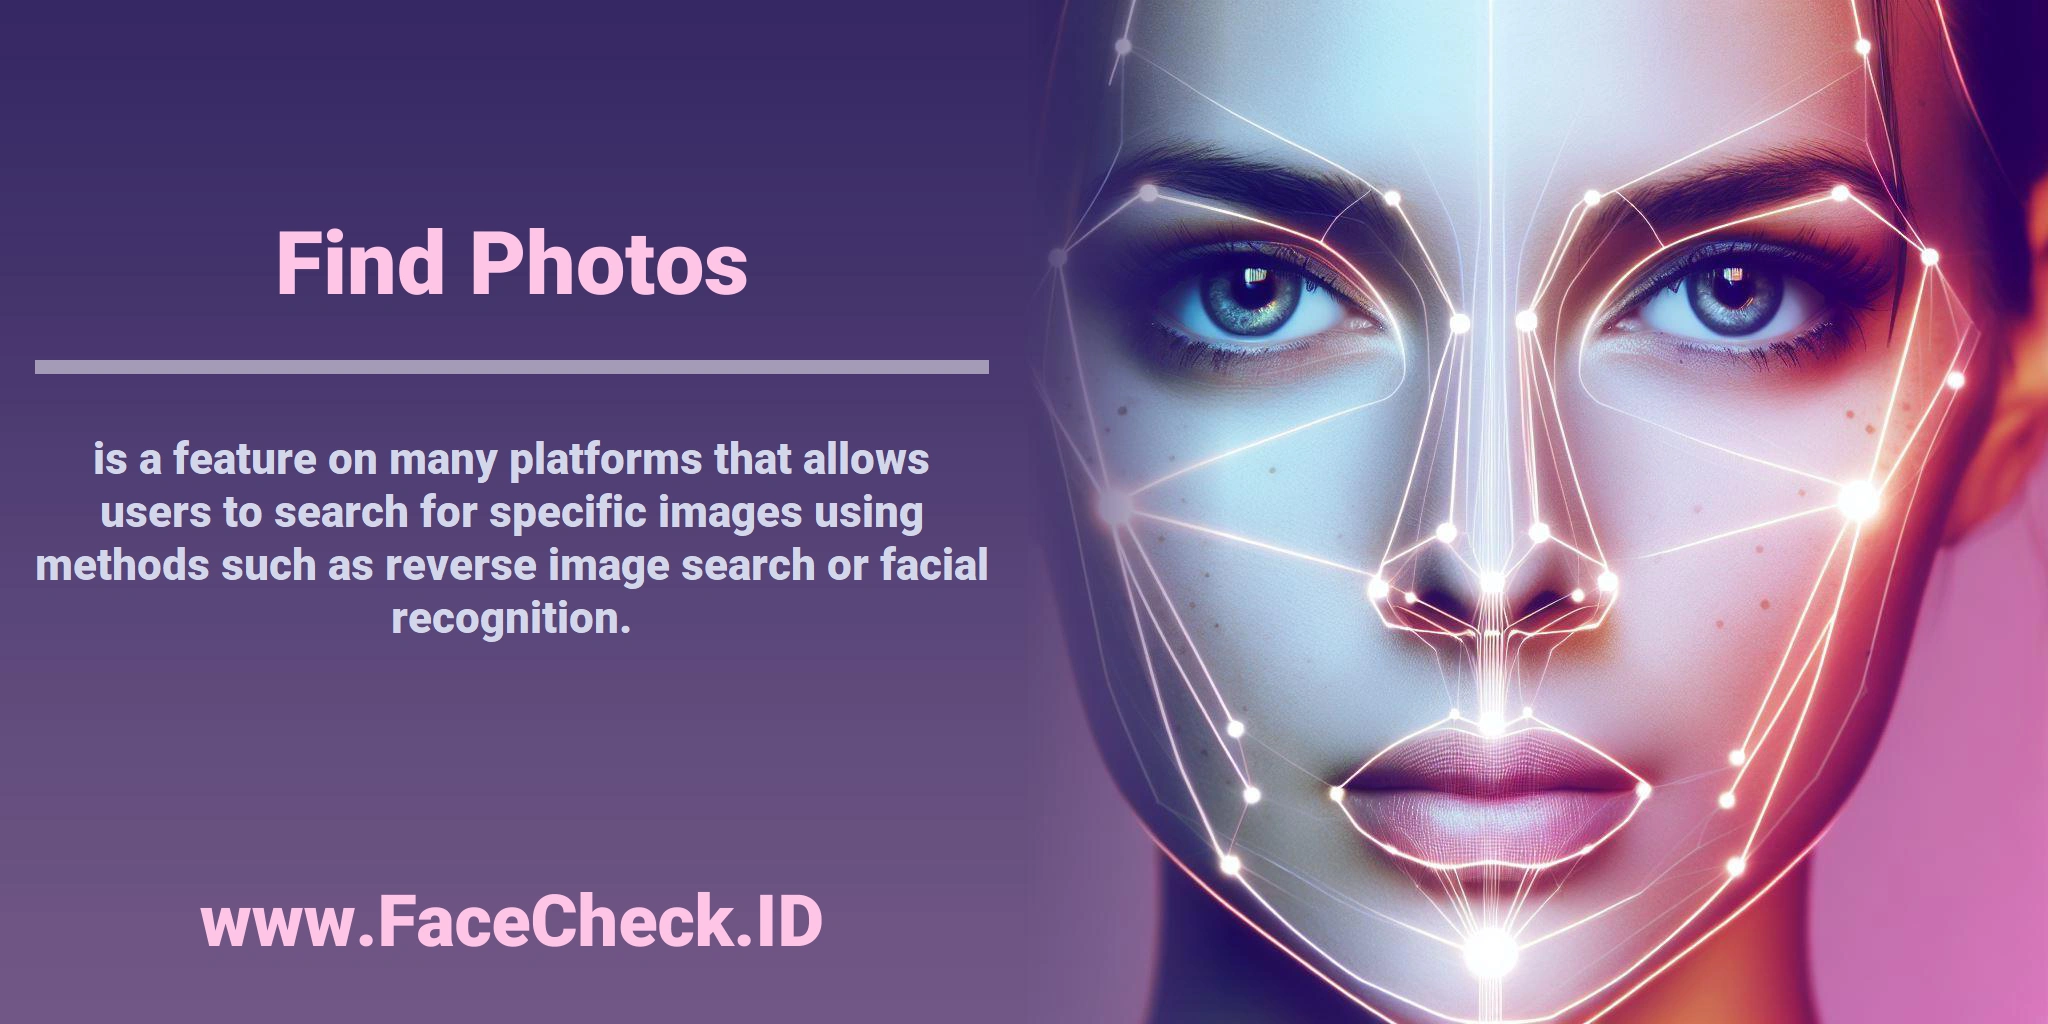 <b>Find Photos</b> is a feature on many platforms that allows users to search for specific images using methods such as reverse image search or facial recognition.